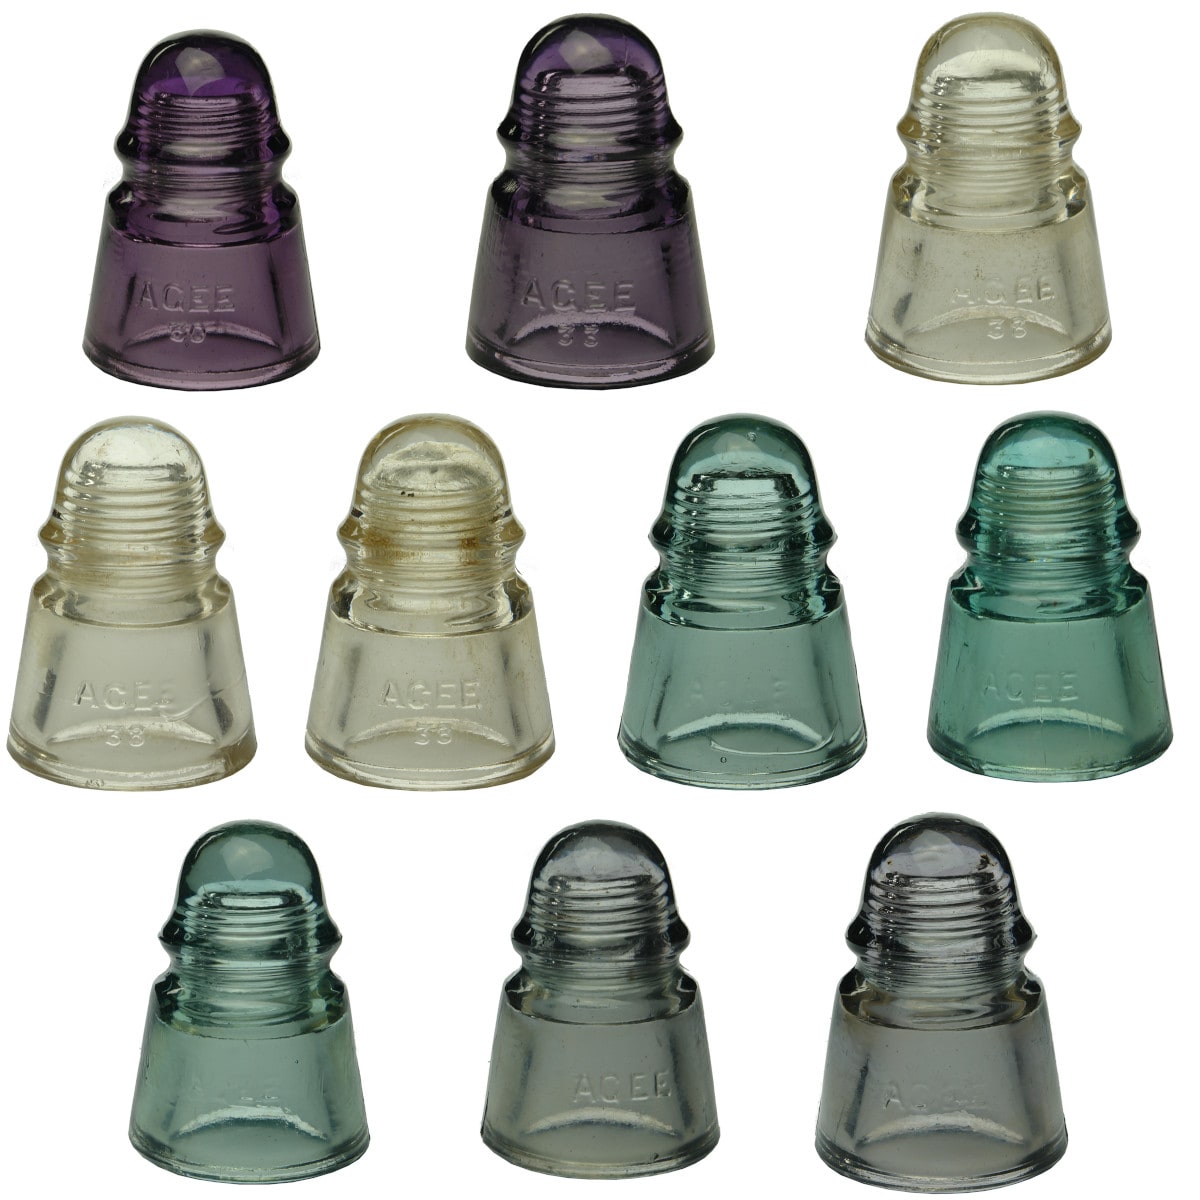 10 Insulators. Agee. (various numbers: 30, 33, 38 and no main number). CD422. Sun Coloured Amethyst, Clear, Aqua & Grey. (Australia)